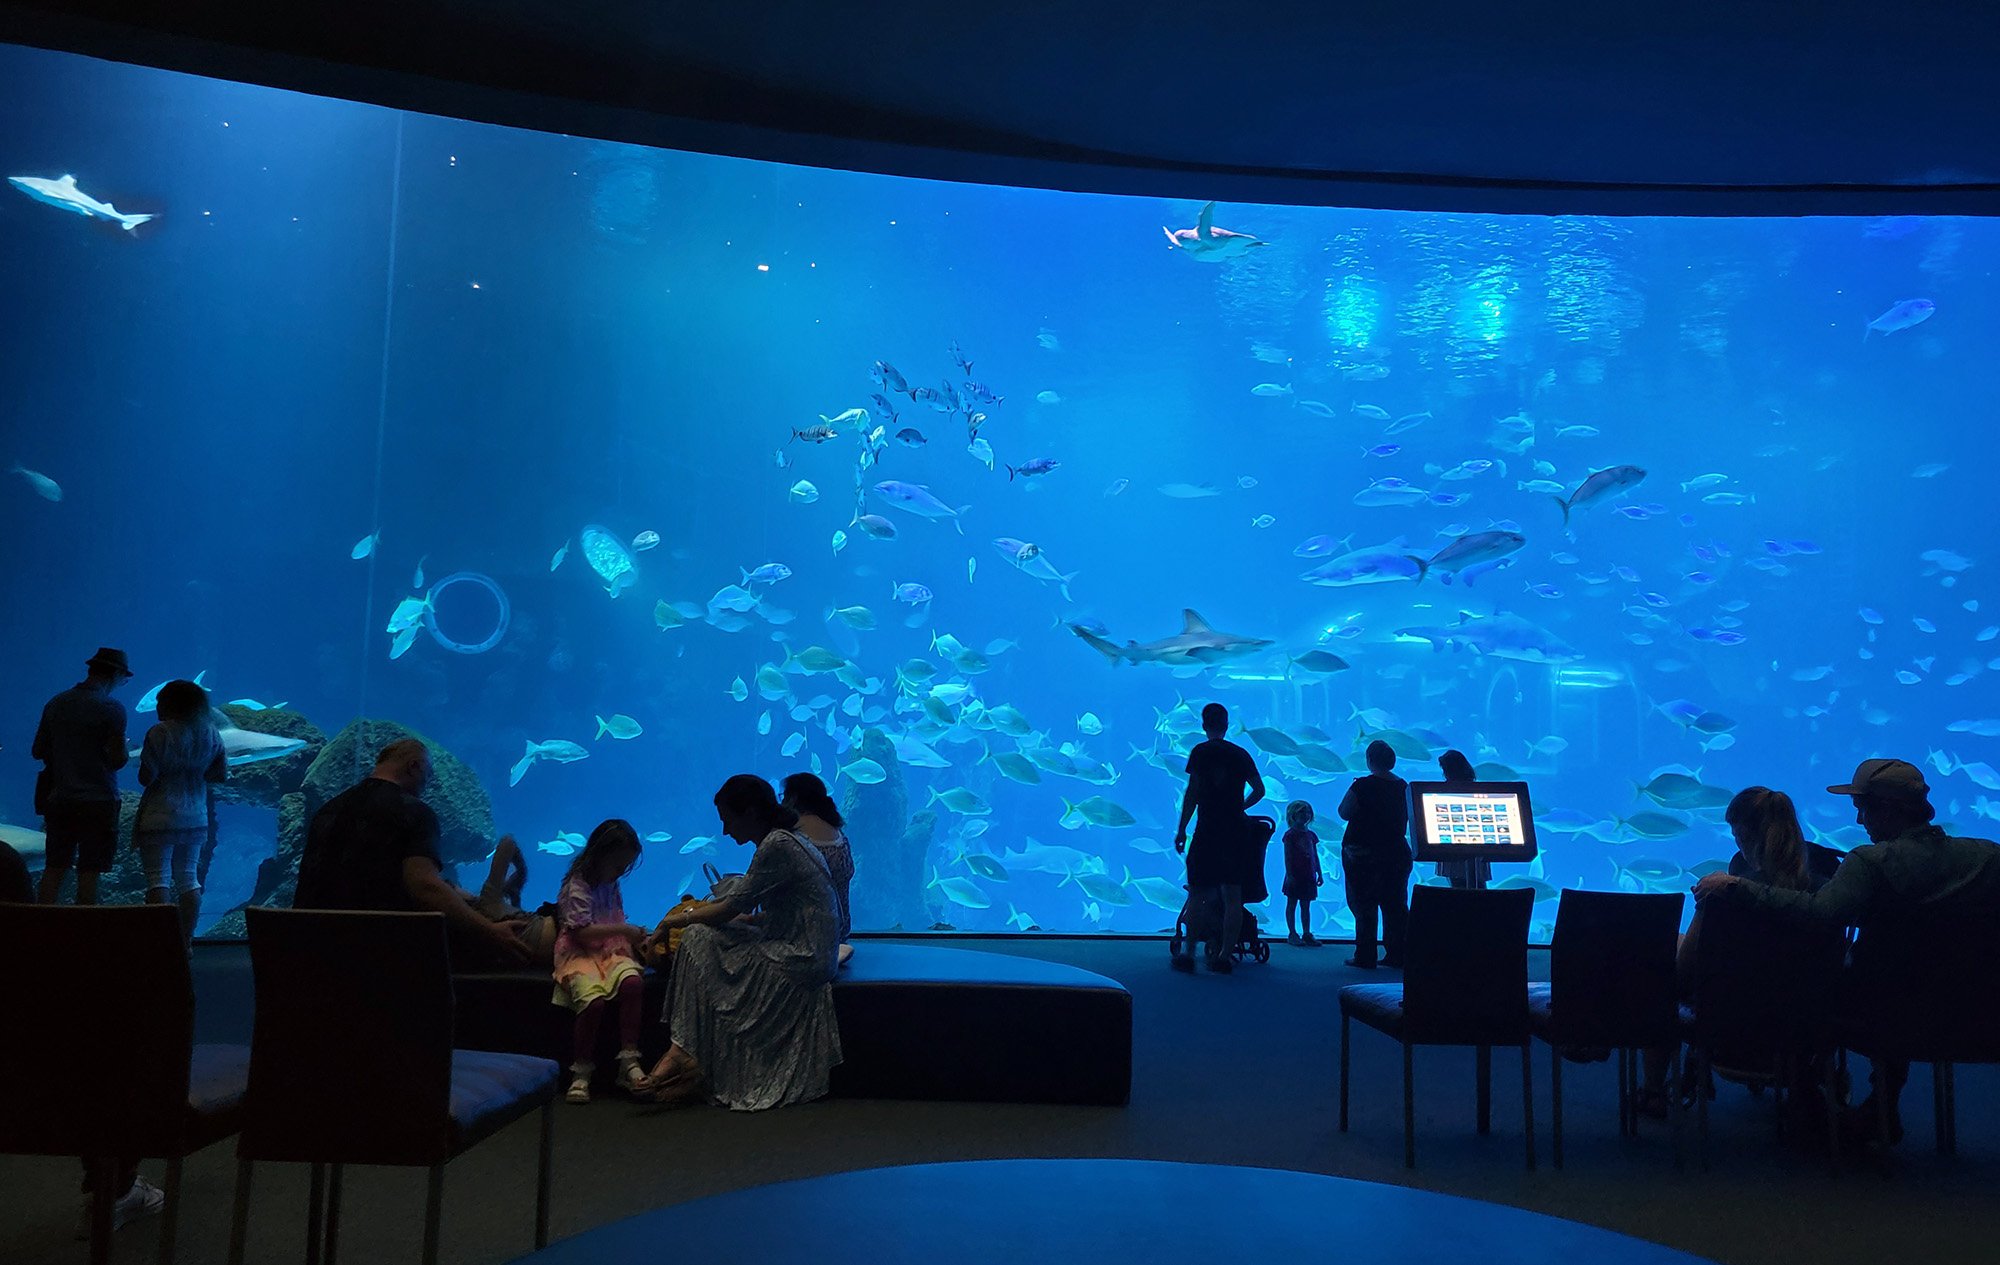 The big feature is this massive aquarium filled with sharks, rays and large fish of all sorts.